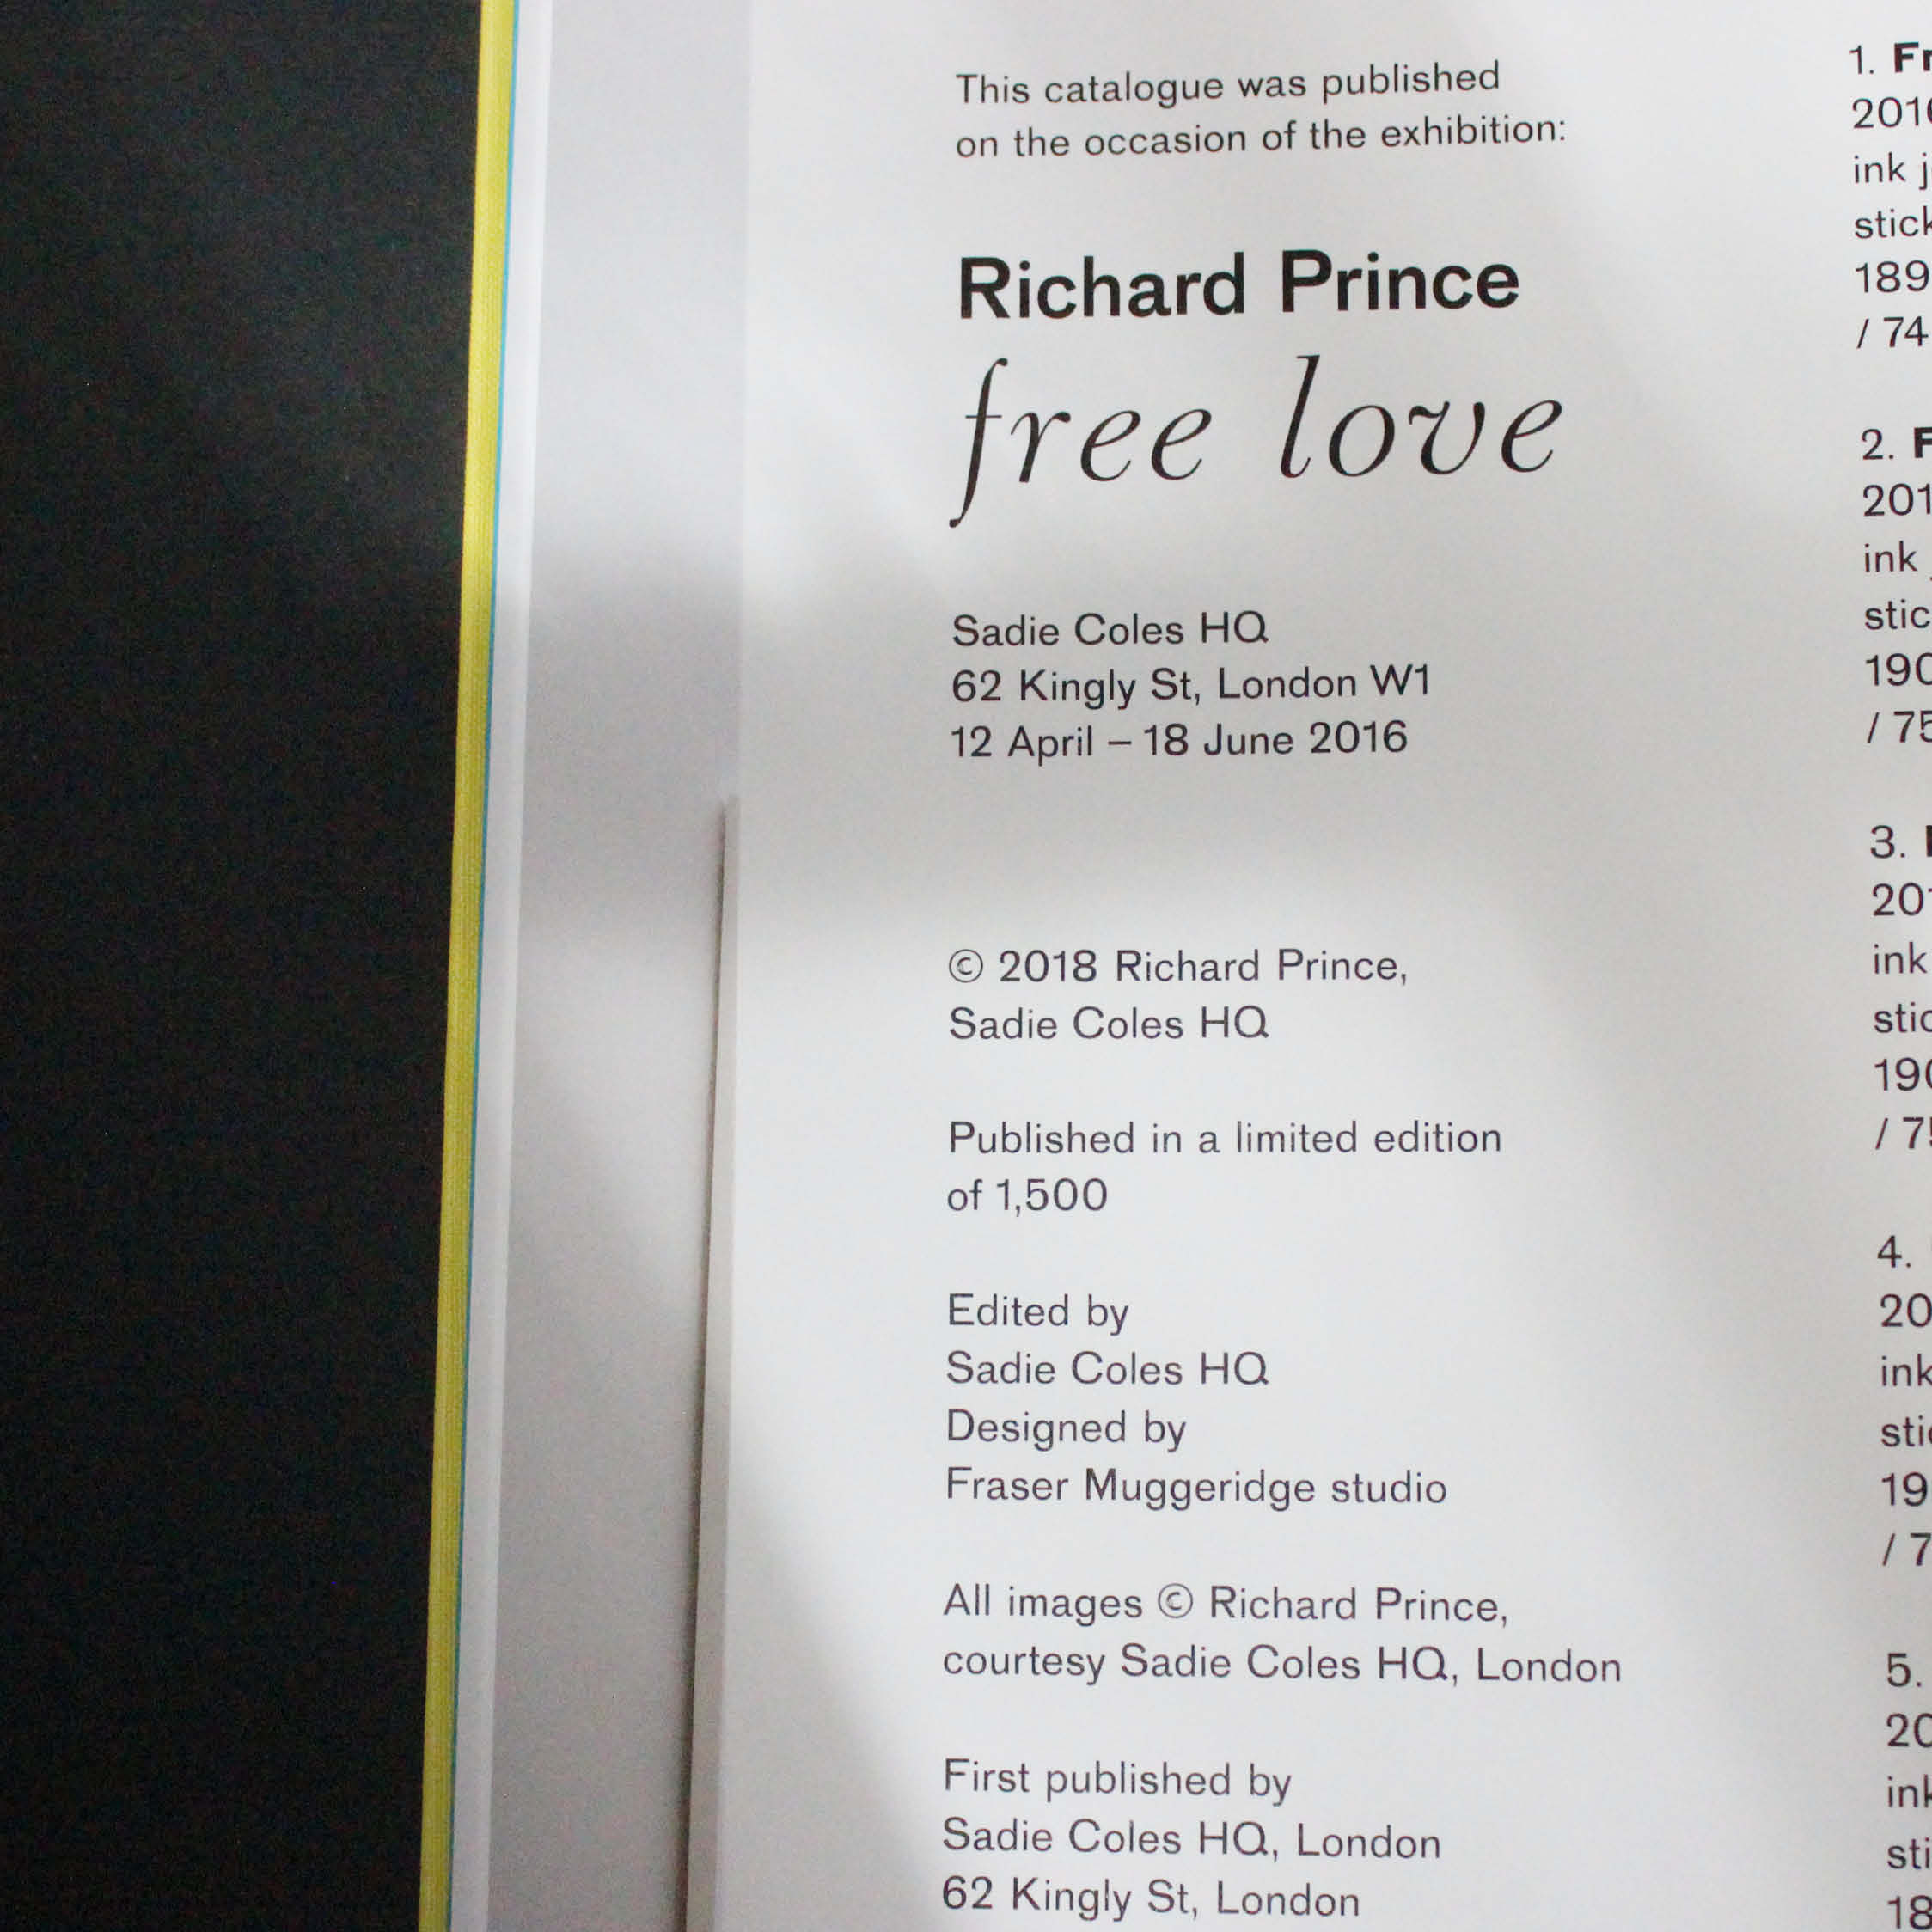 Richard Prince, Free Love exhibition catalogue for Sadie Coles HQ